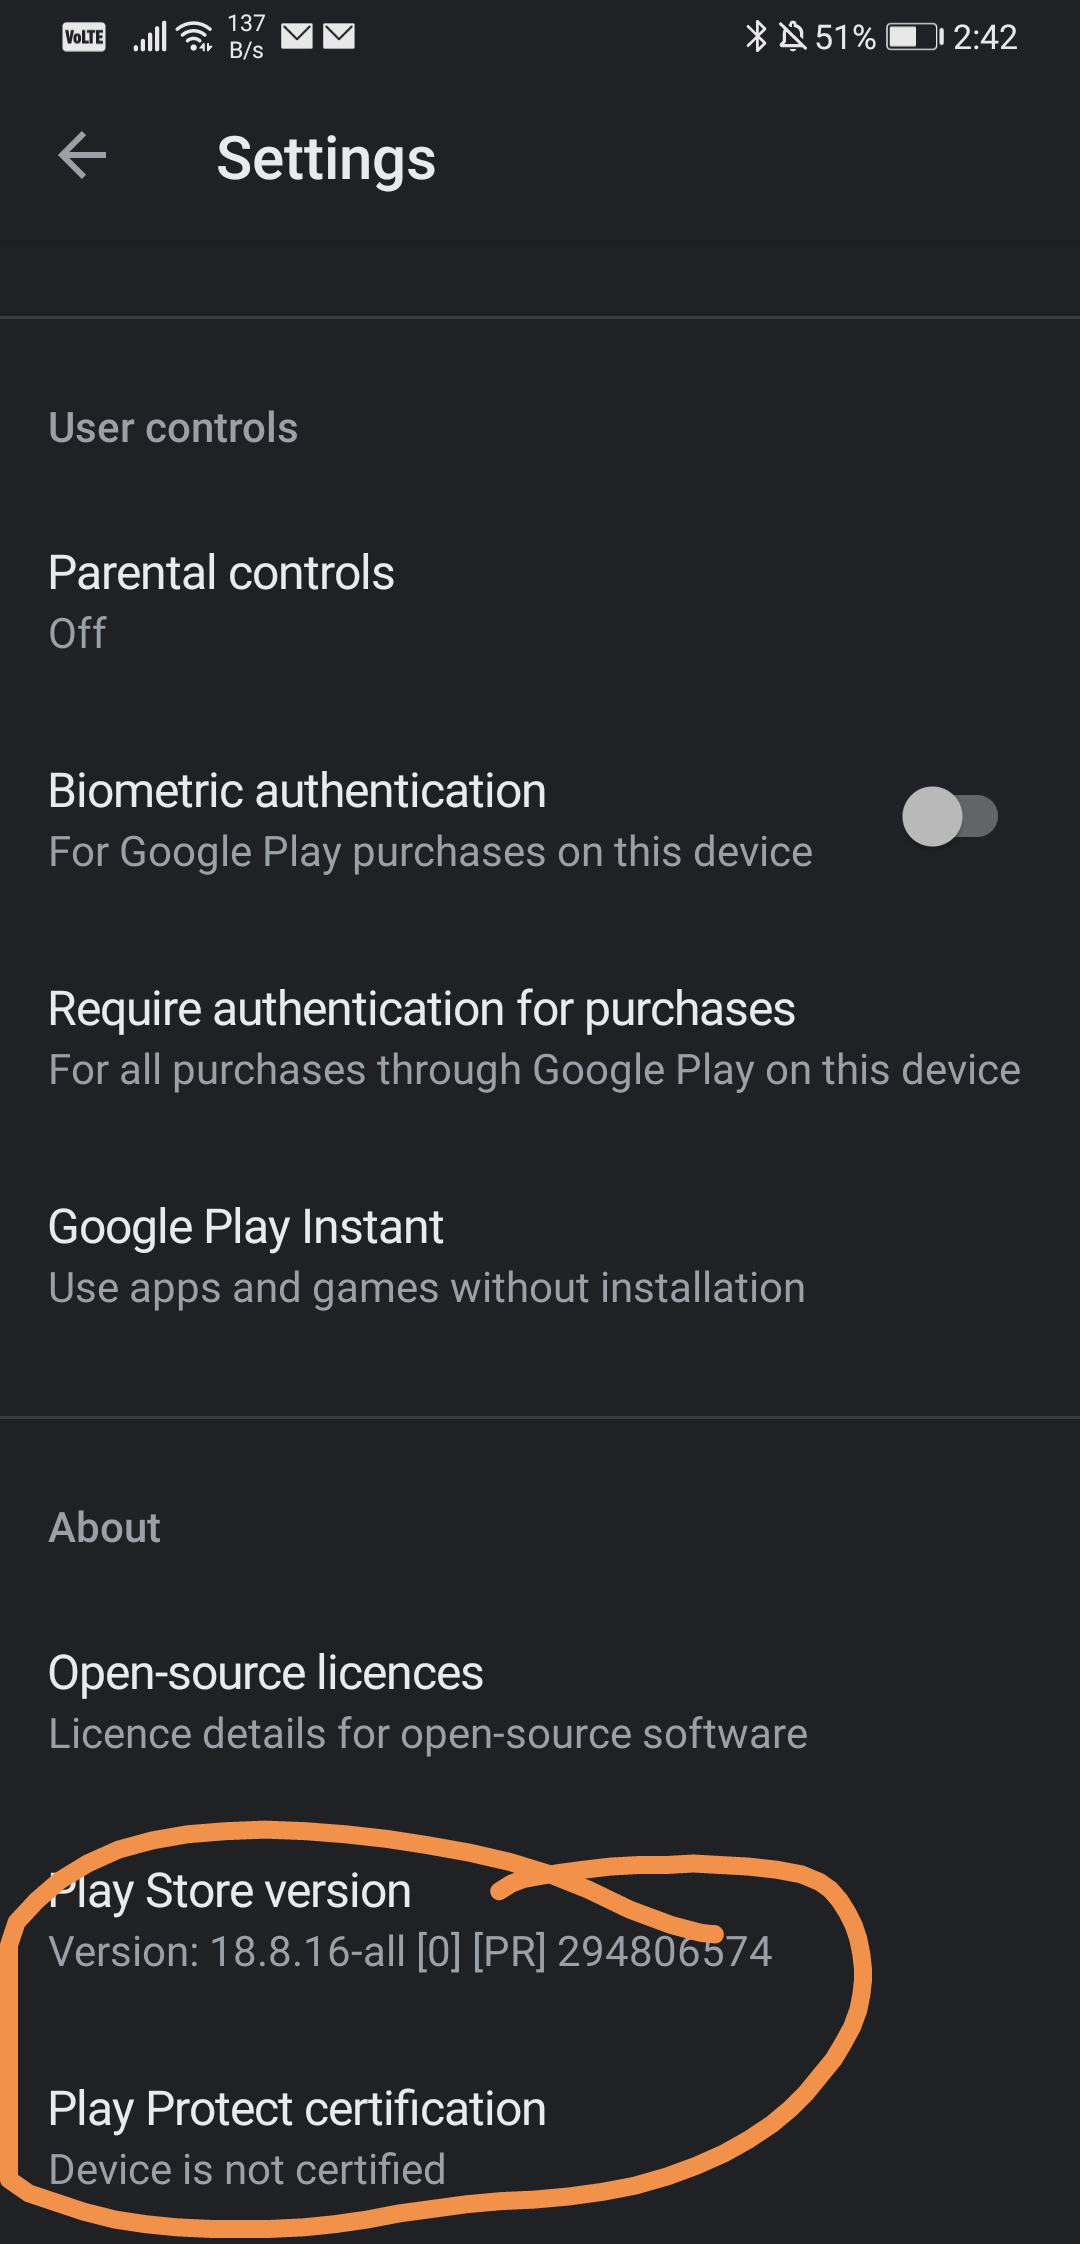 Federaal blad tragedie My Huawei mate 20x show '' device is not certified'' pls advise. Thank. - Google  Play Community